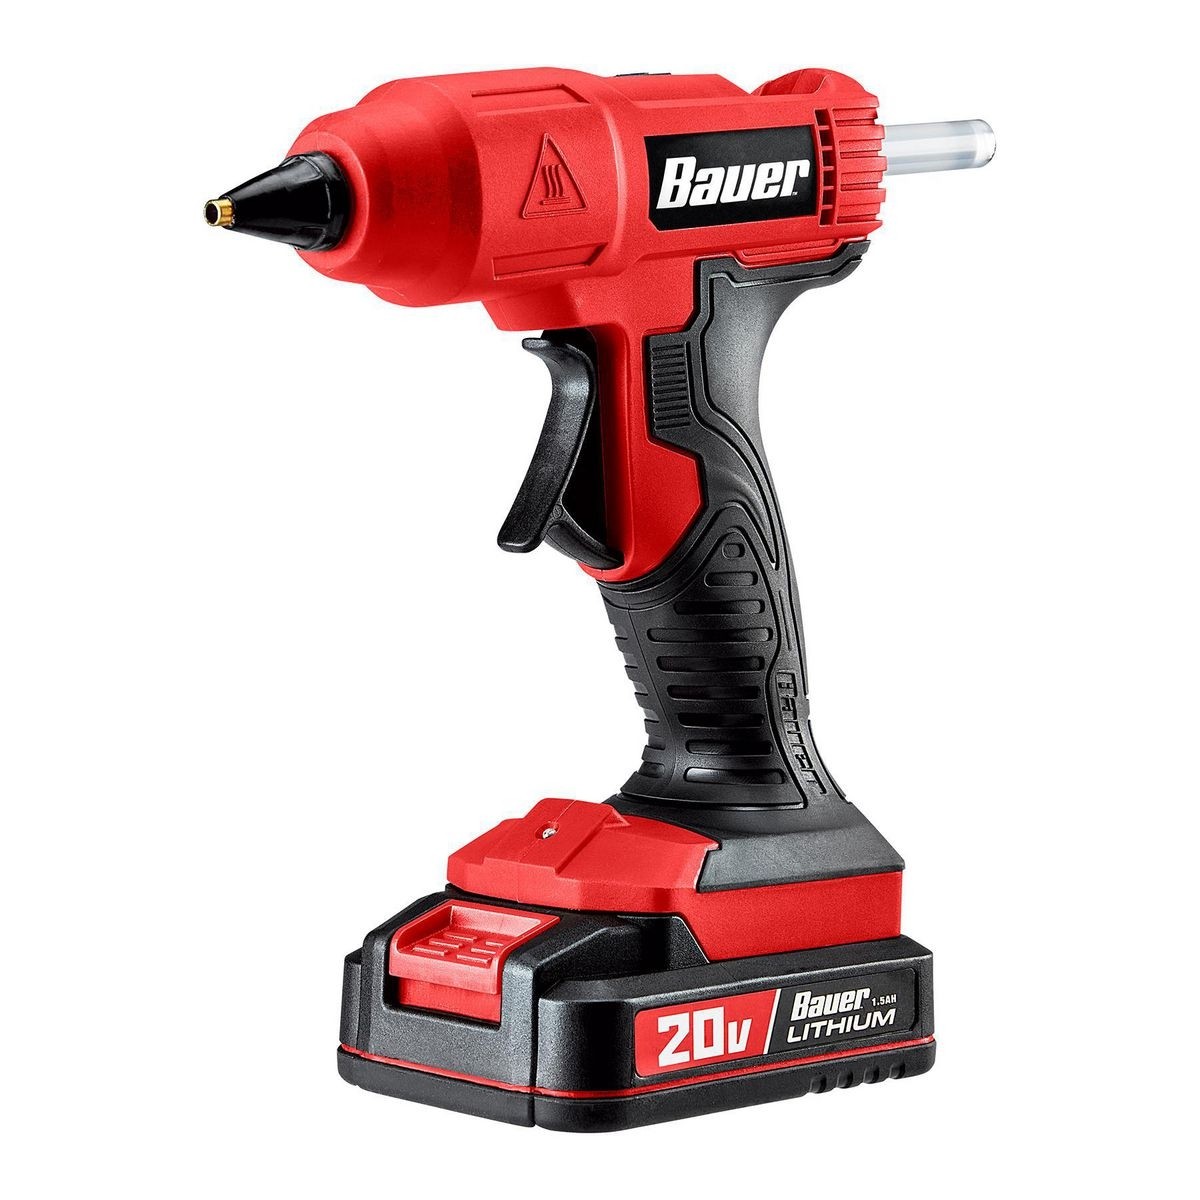 Coupons for BAUER 20v Cordless Full Sized Glue Gun – Tool Only – Item 57997